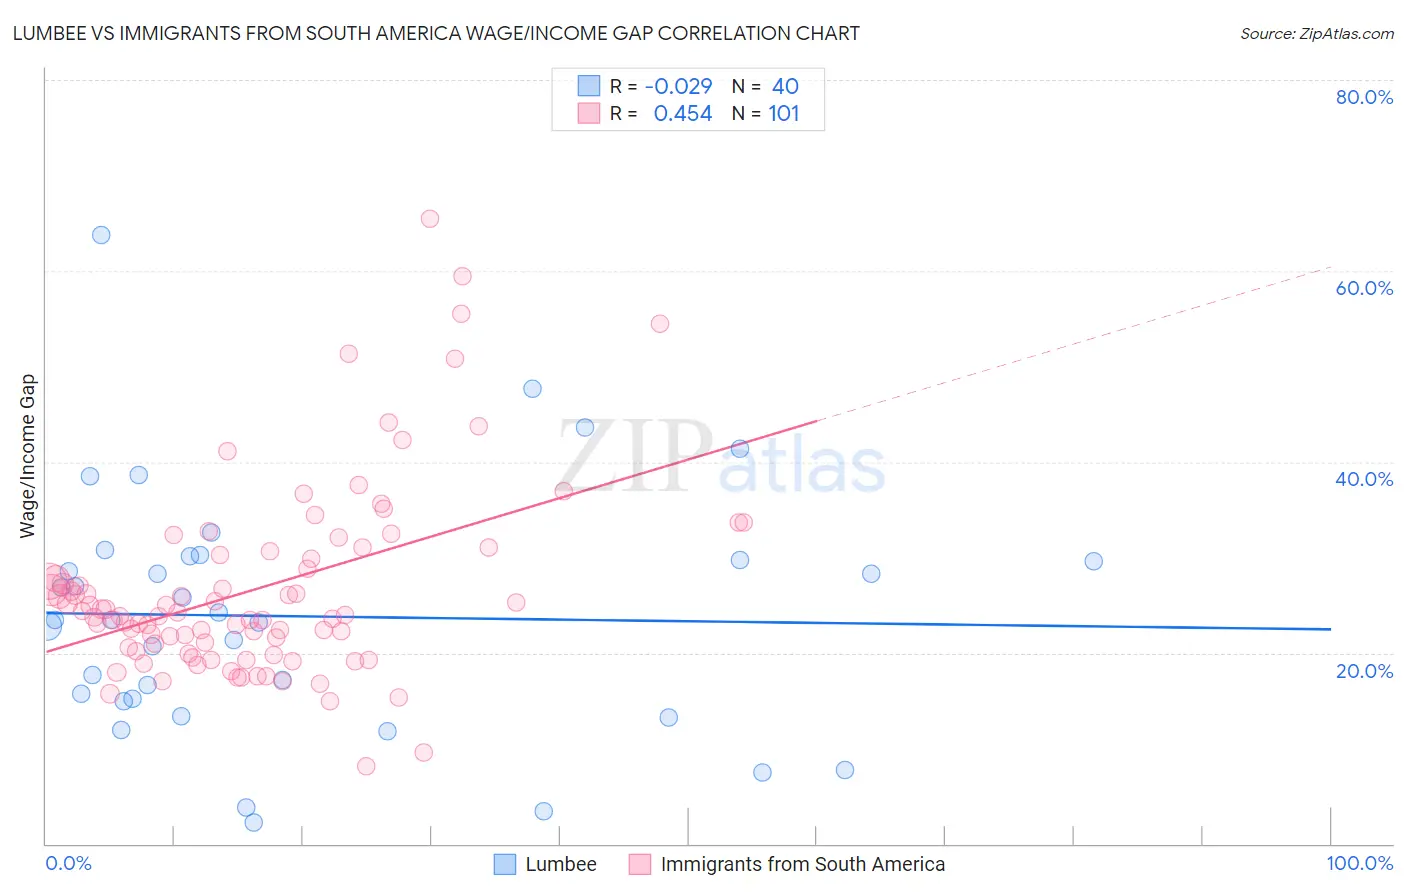 Lumbee vs Immigrants from South America Wage/Income Gap